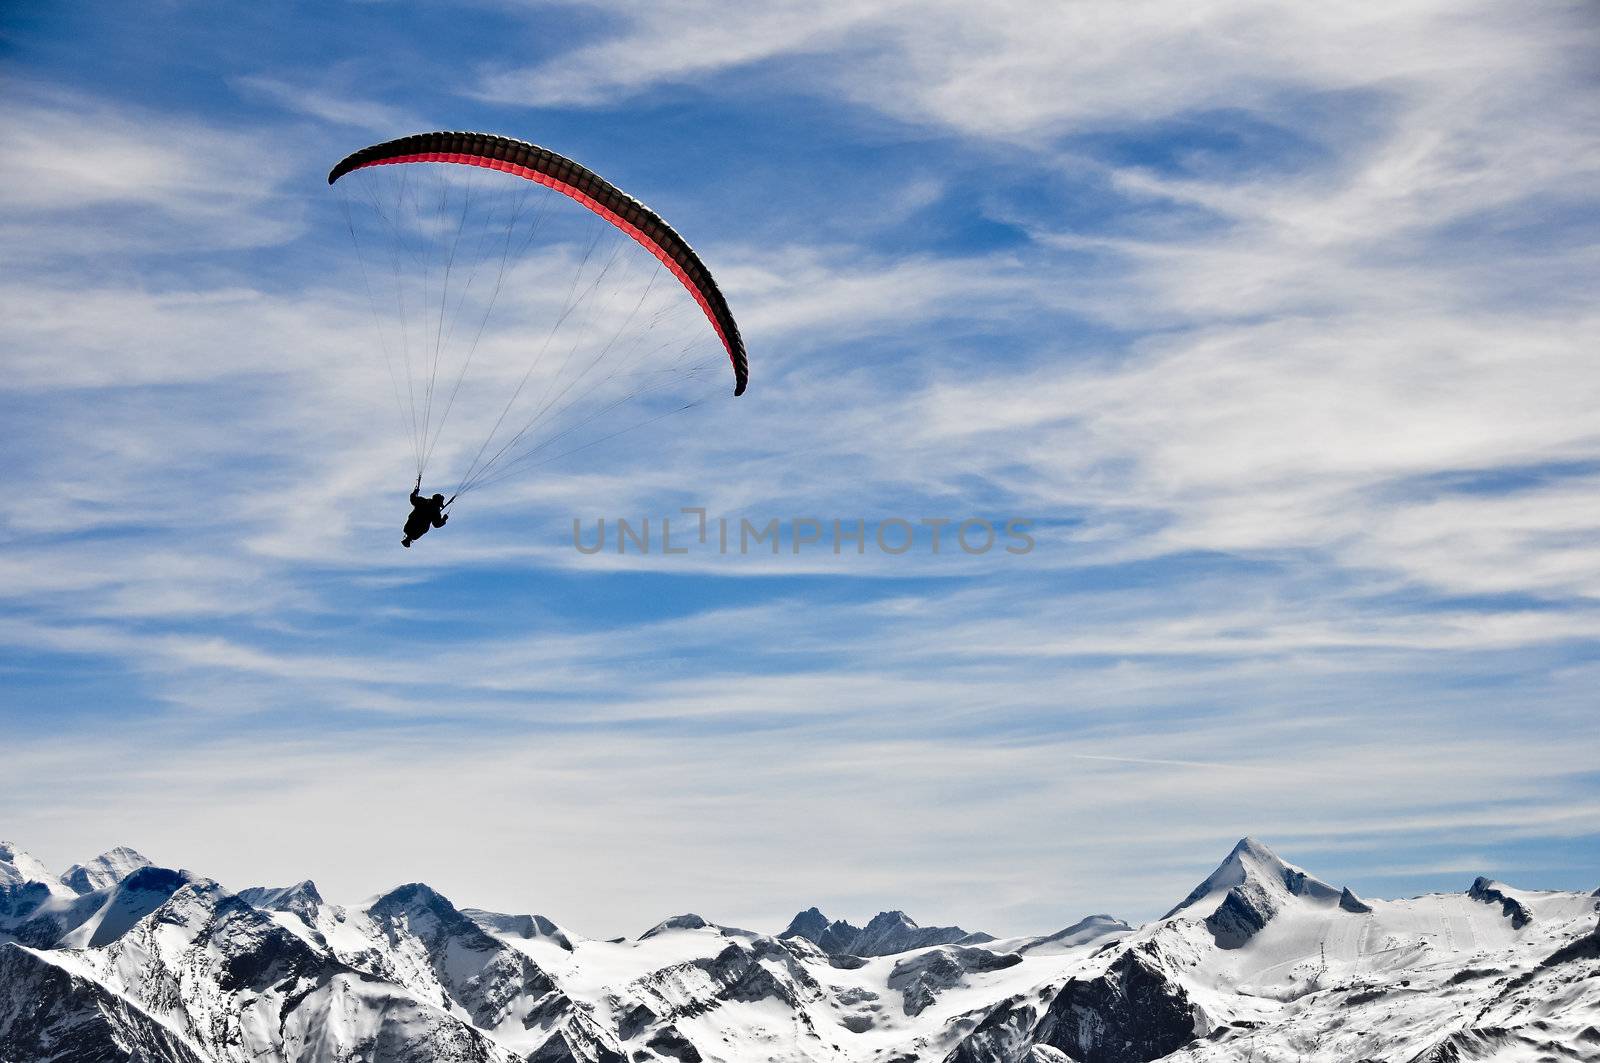 Winter mountains and paragliding by martinm303